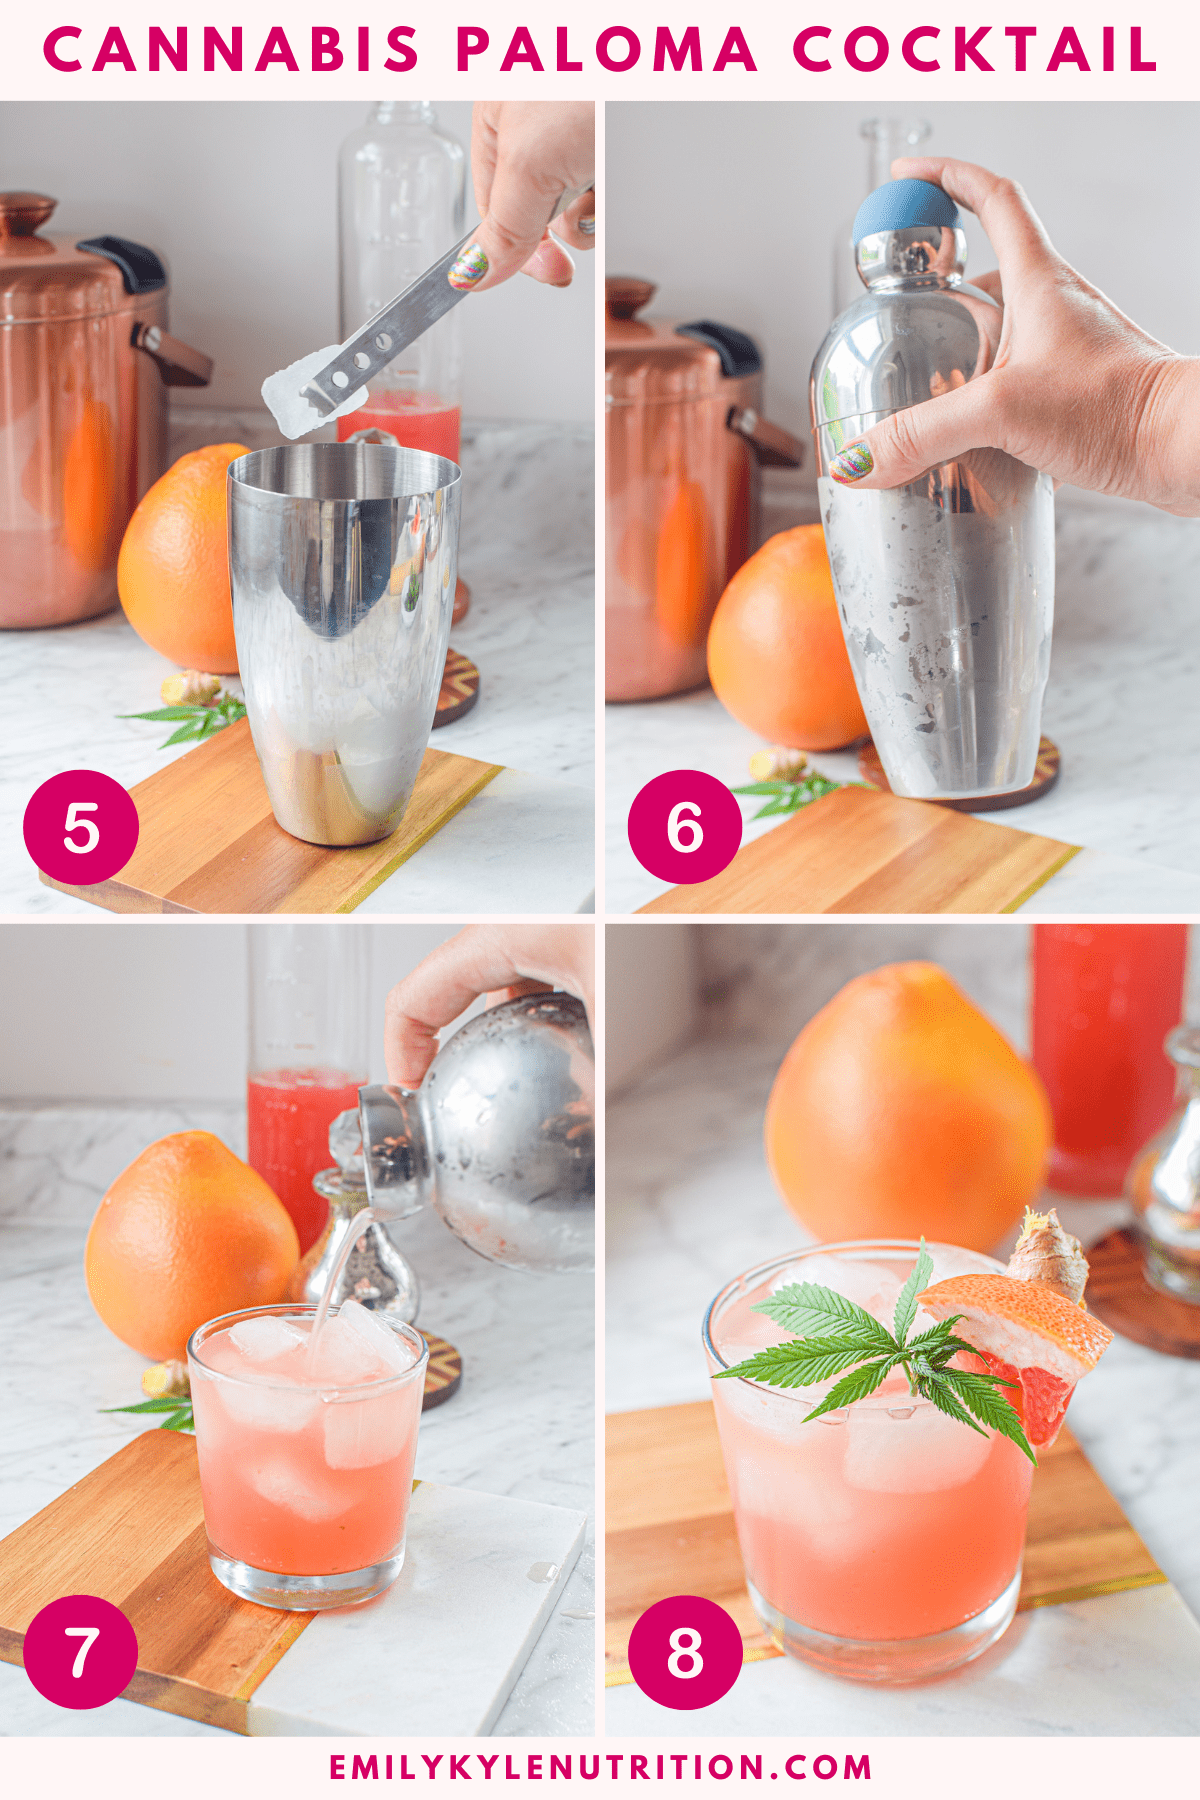 A four step image collage showing how to make a cannabis Paloma cocktail.